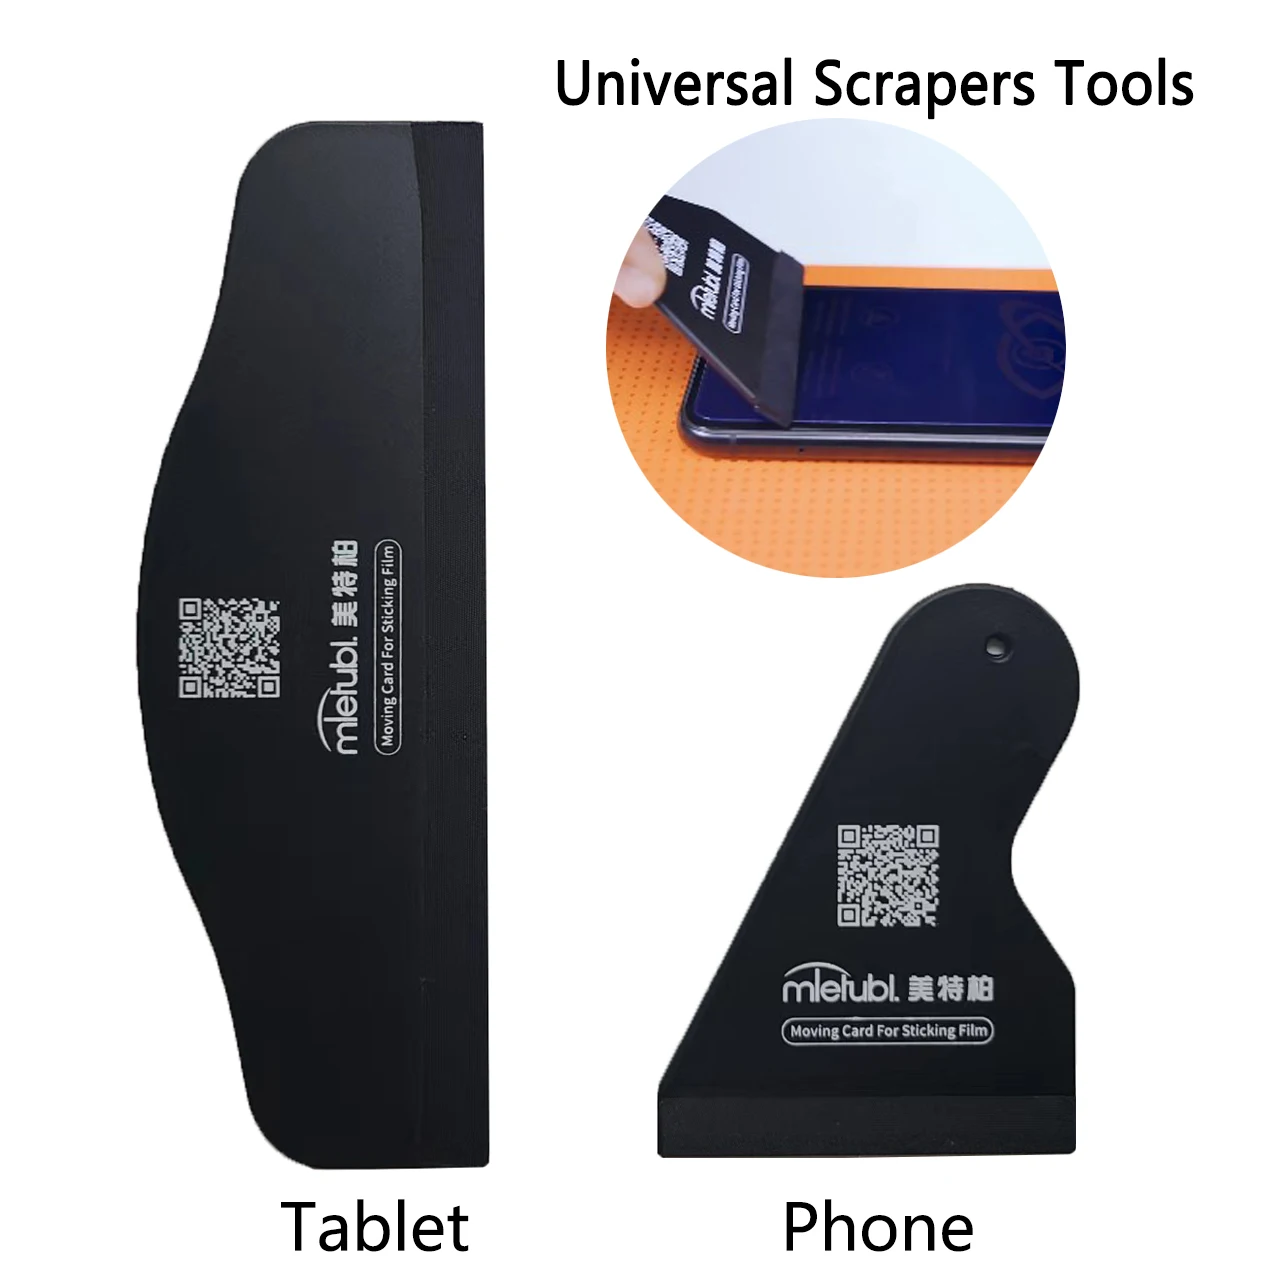 Mietubl Hydrogel Cut MachinePlotter Film Universal Wrapping Scraper  De-bubble Shovel For Phone Tablet Screen Film Applying Tools